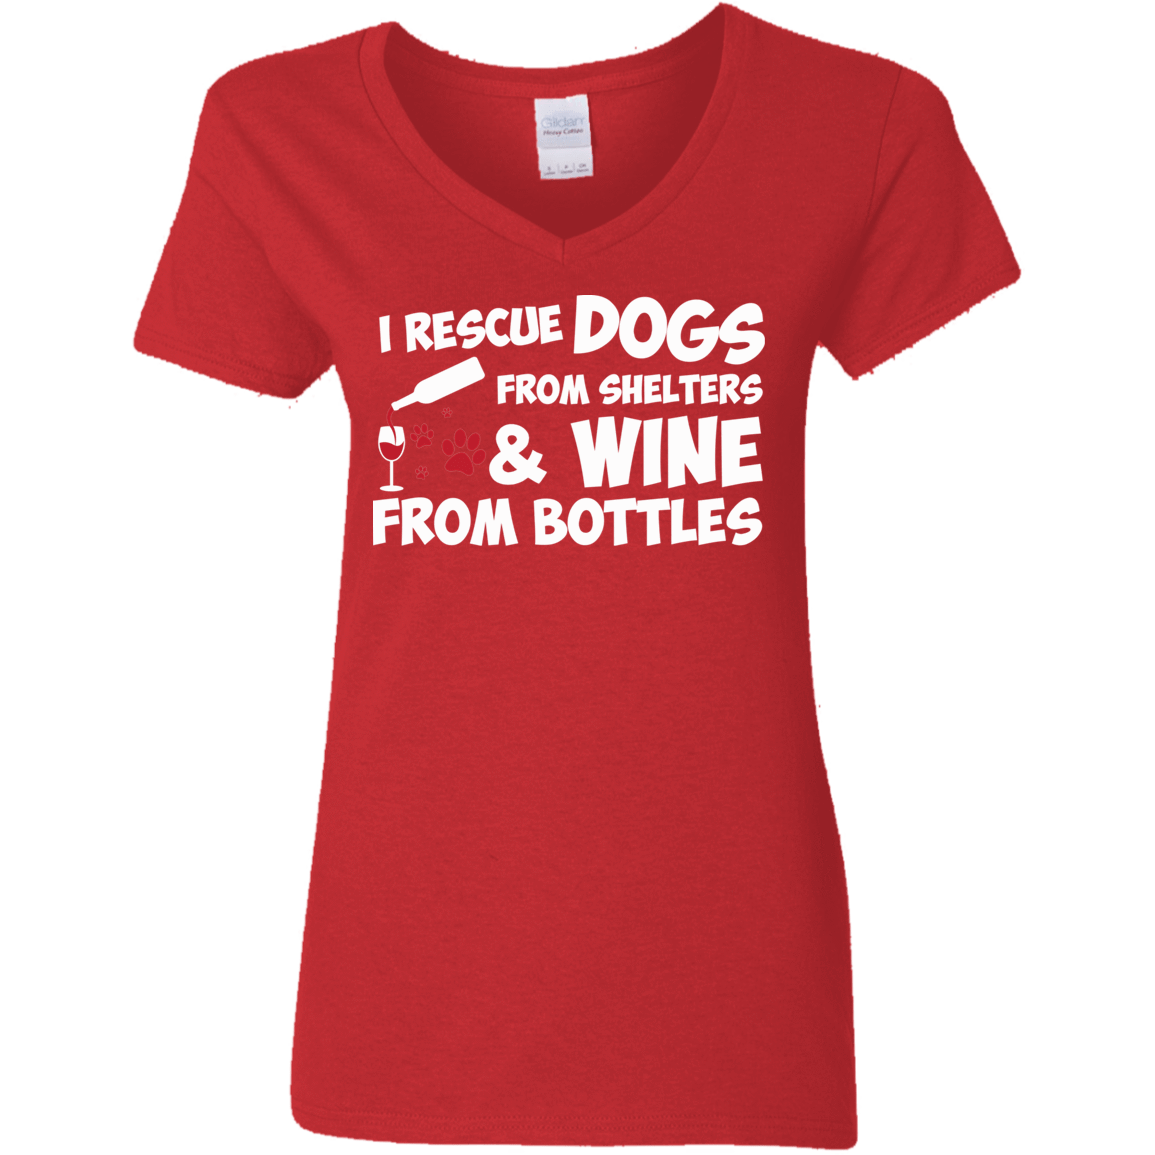 I Rescue Dogs And Wine - Ladies V Neck.